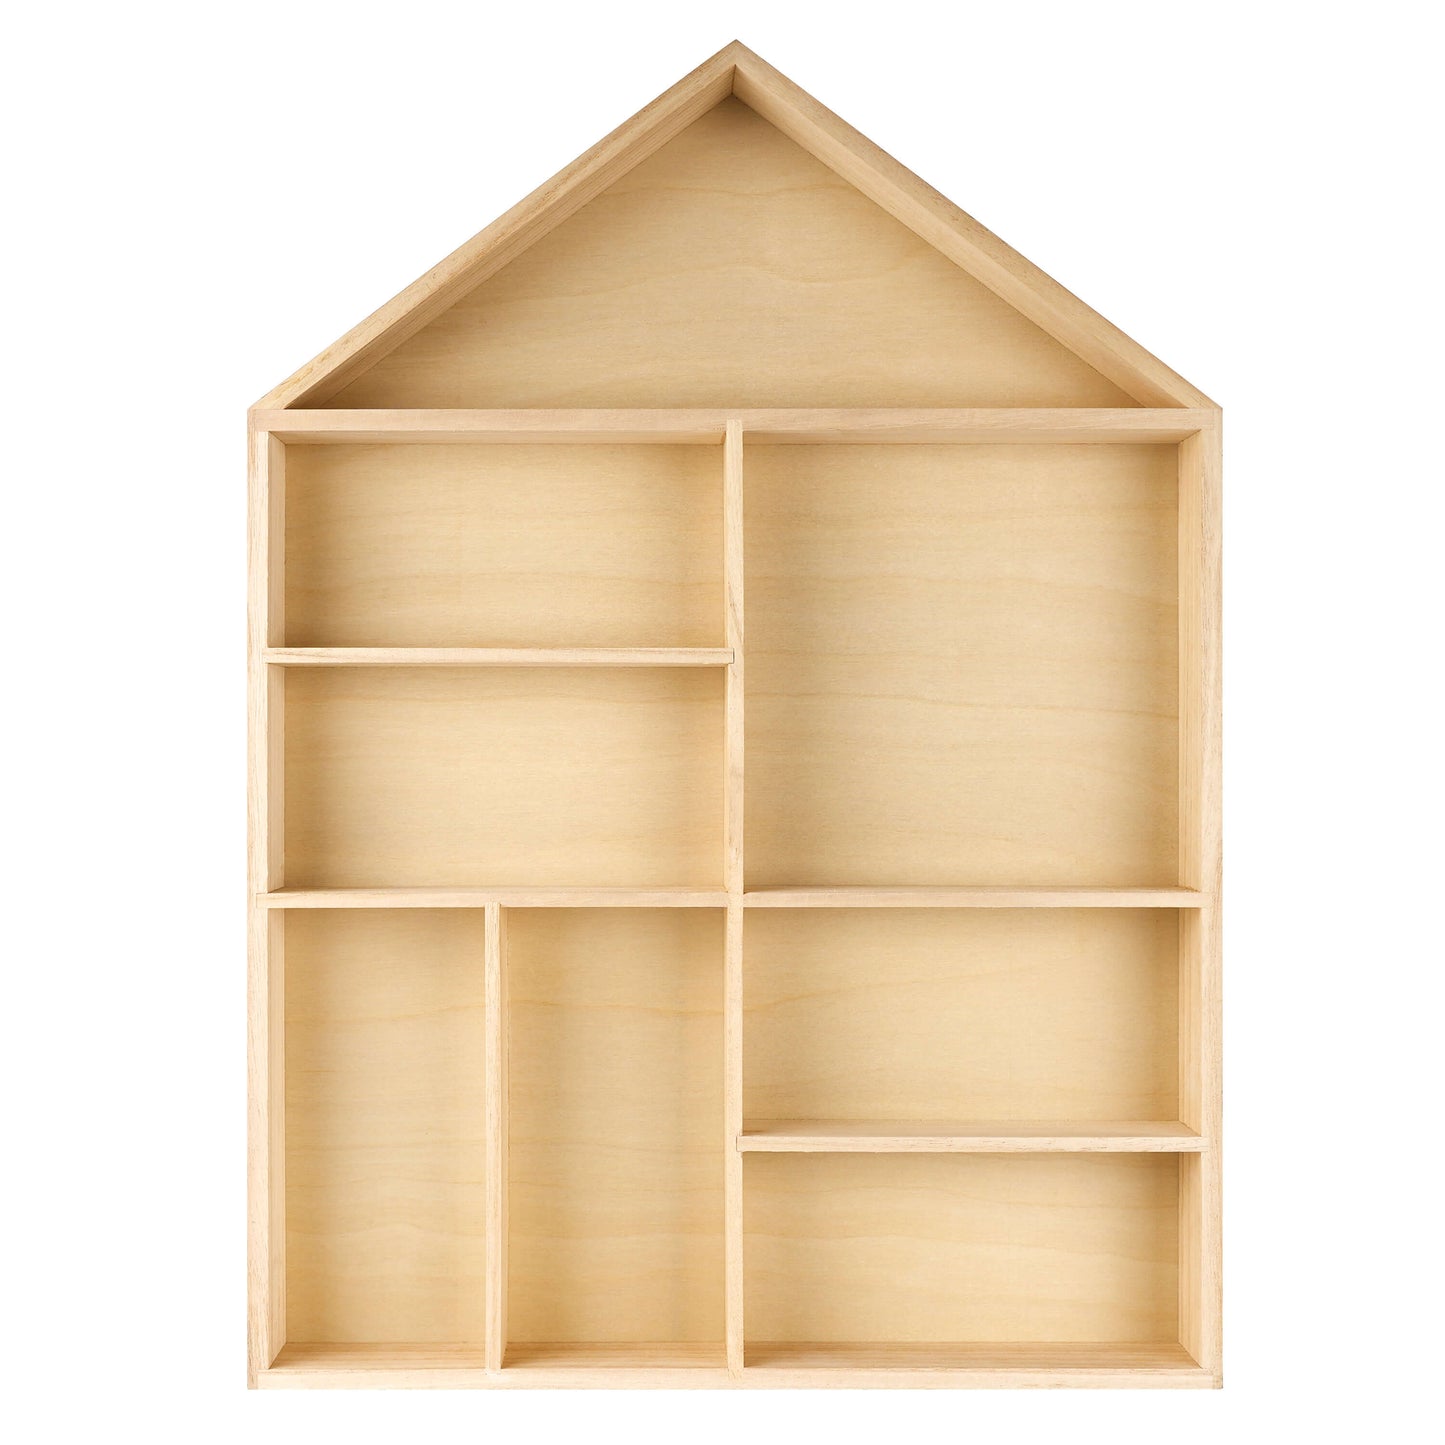 House shaped wooden toy display shelf with a black finish on the outside ( Empty, front view)